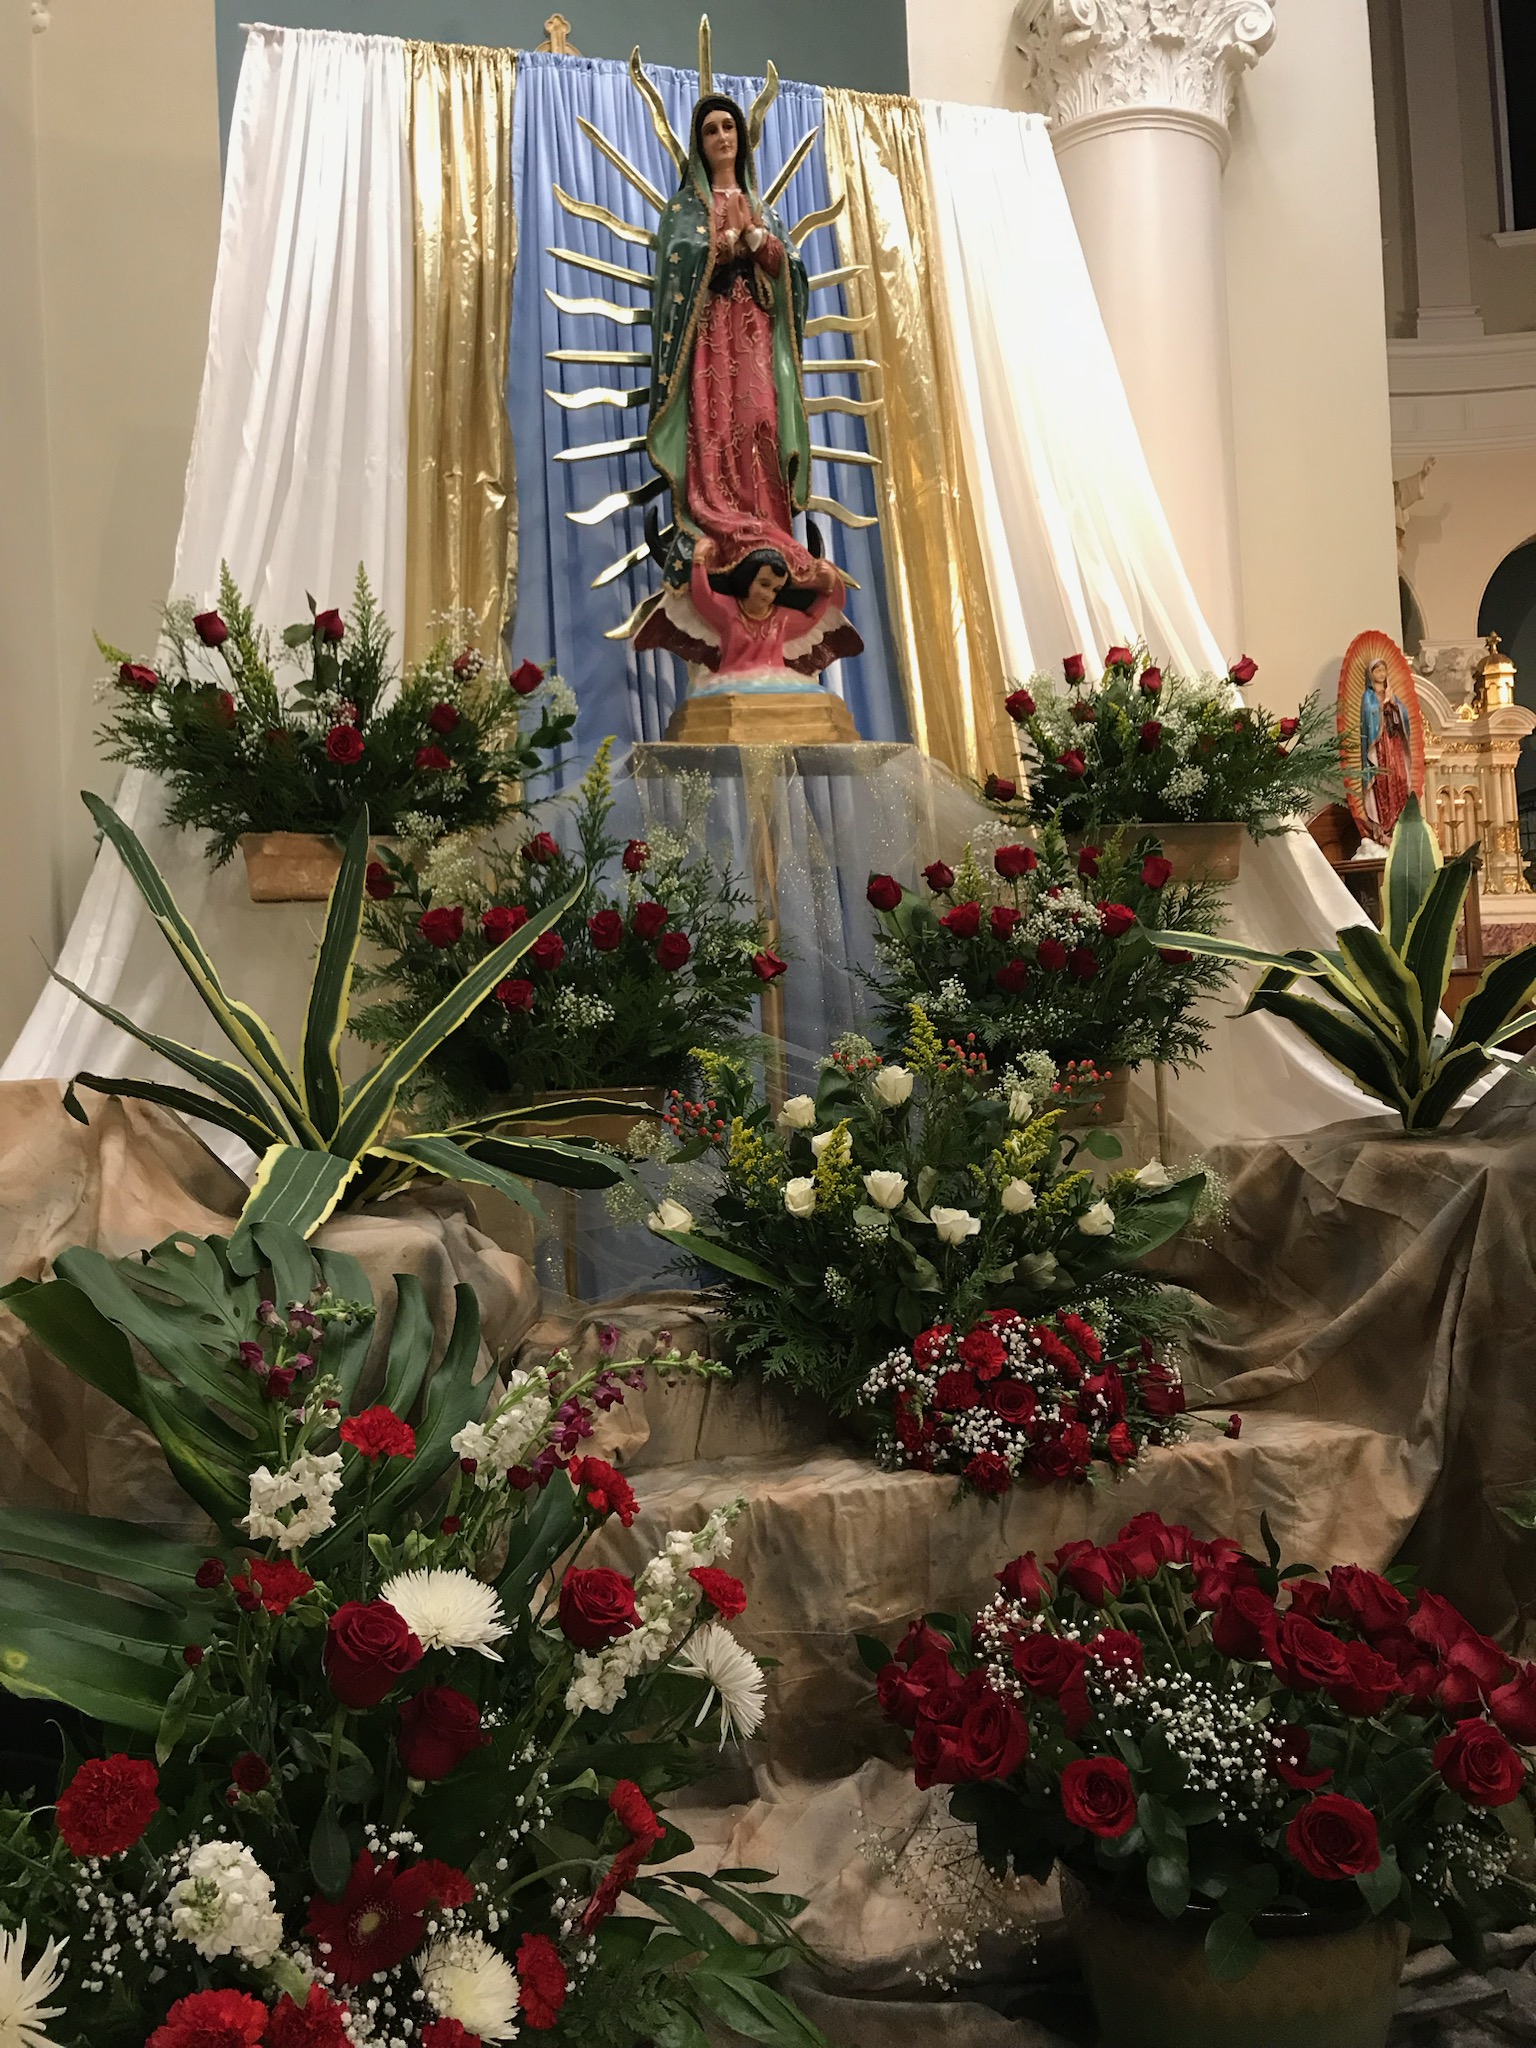 Feast of Our Lady of Guadalupe Dec. 10 - The Cullman Tribune